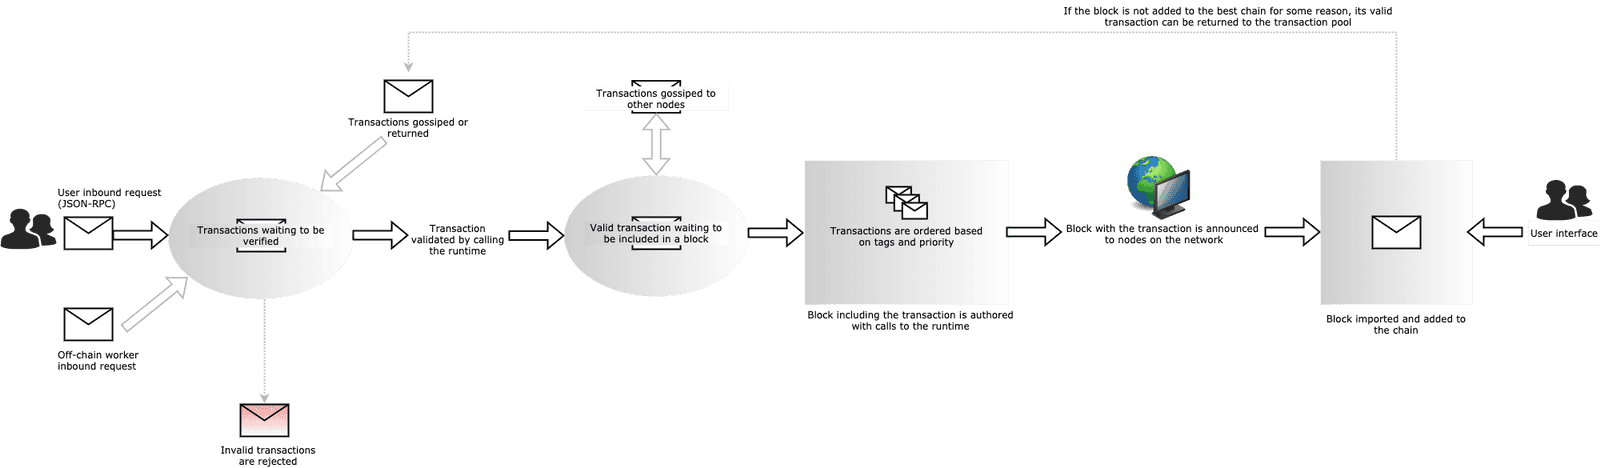 Transaction lifecycle overview